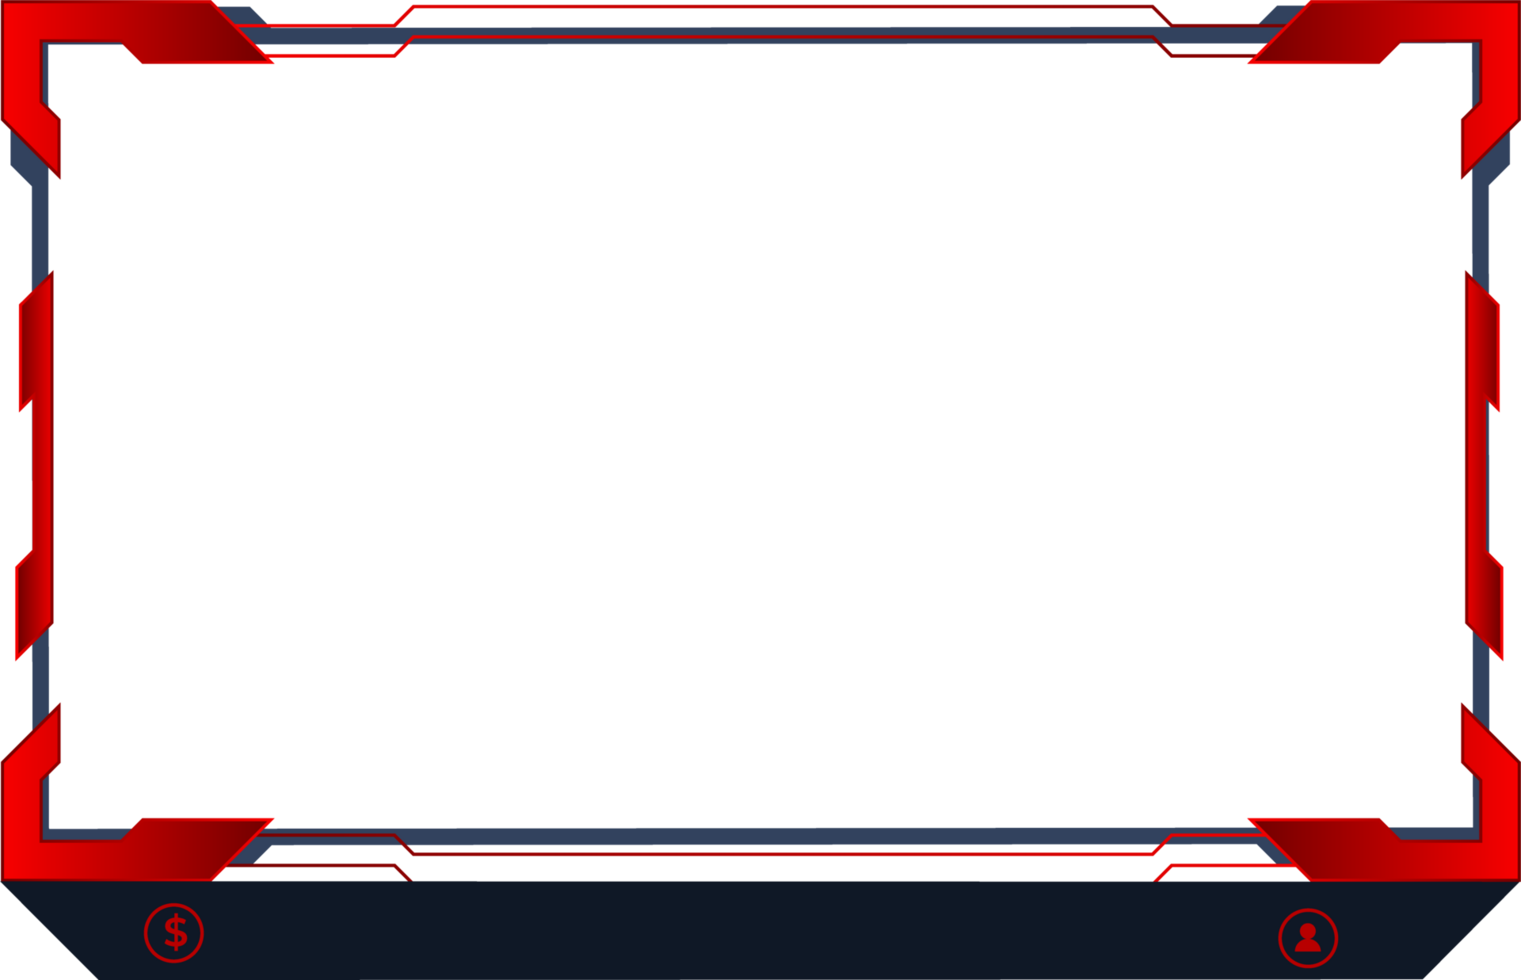 Digital live streaming overlay decoration with dark red color